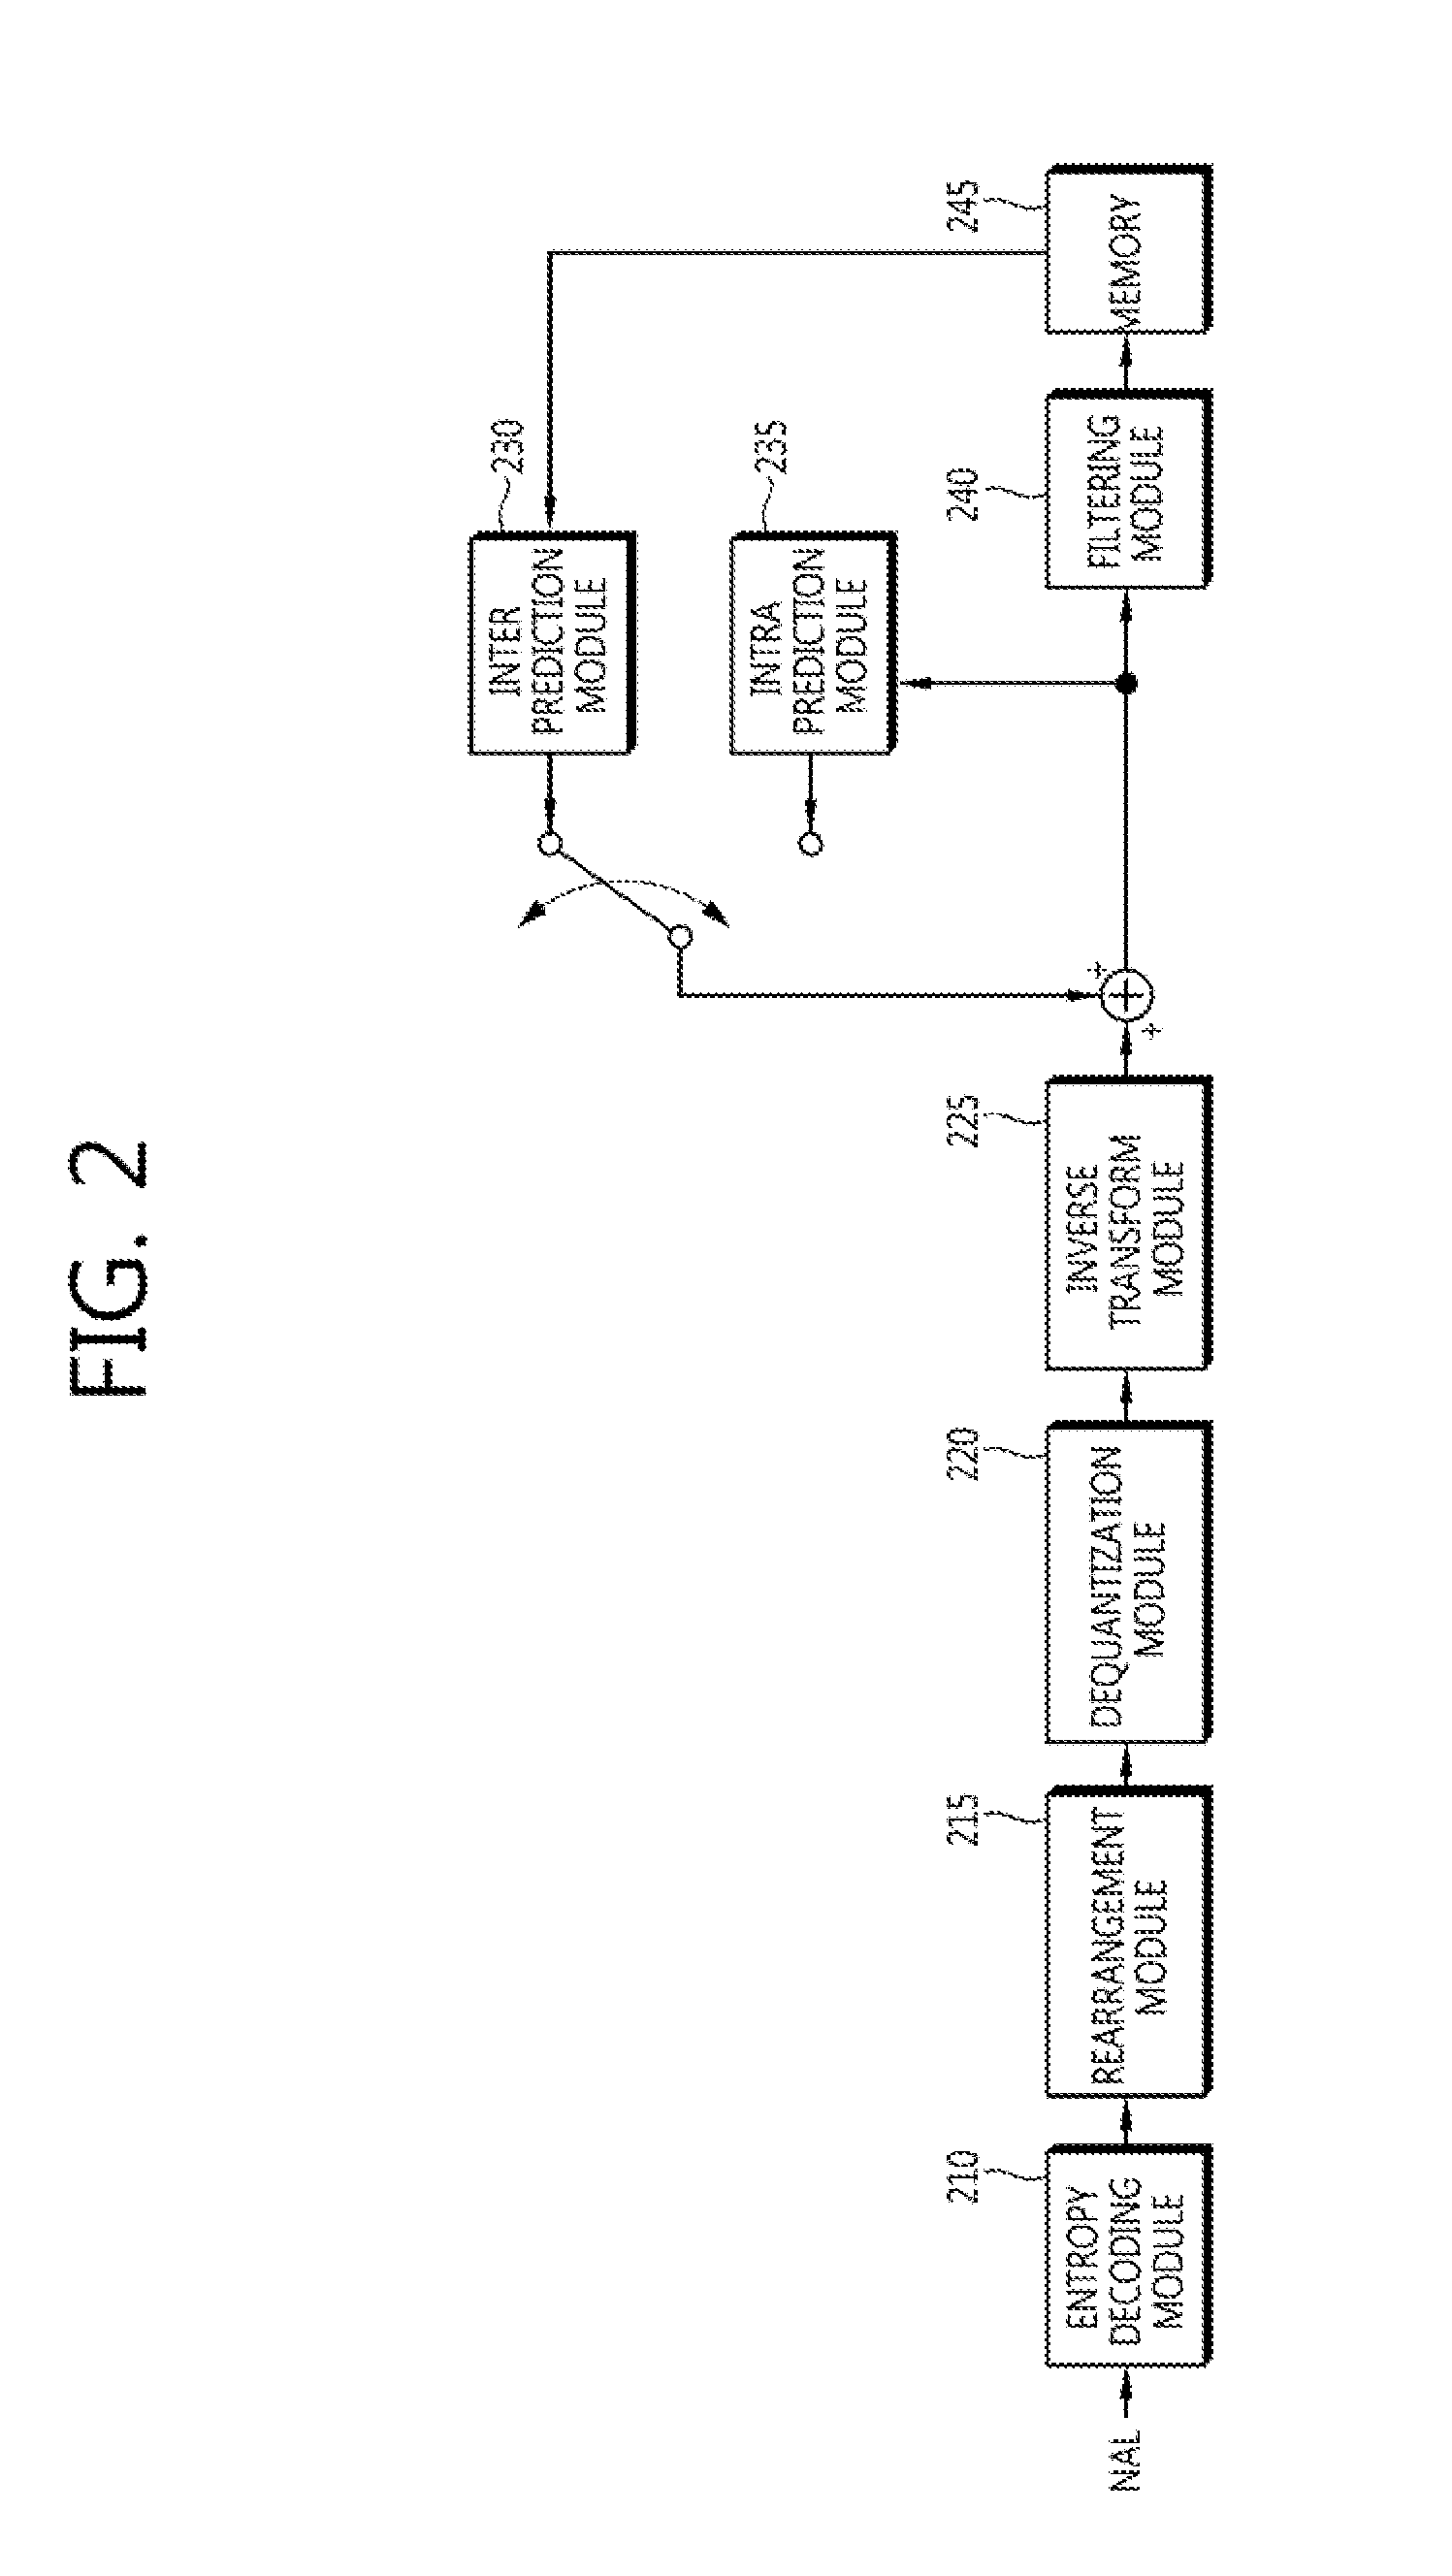 Method for deriving a temporal predictive motion vector, and apparatus using the method